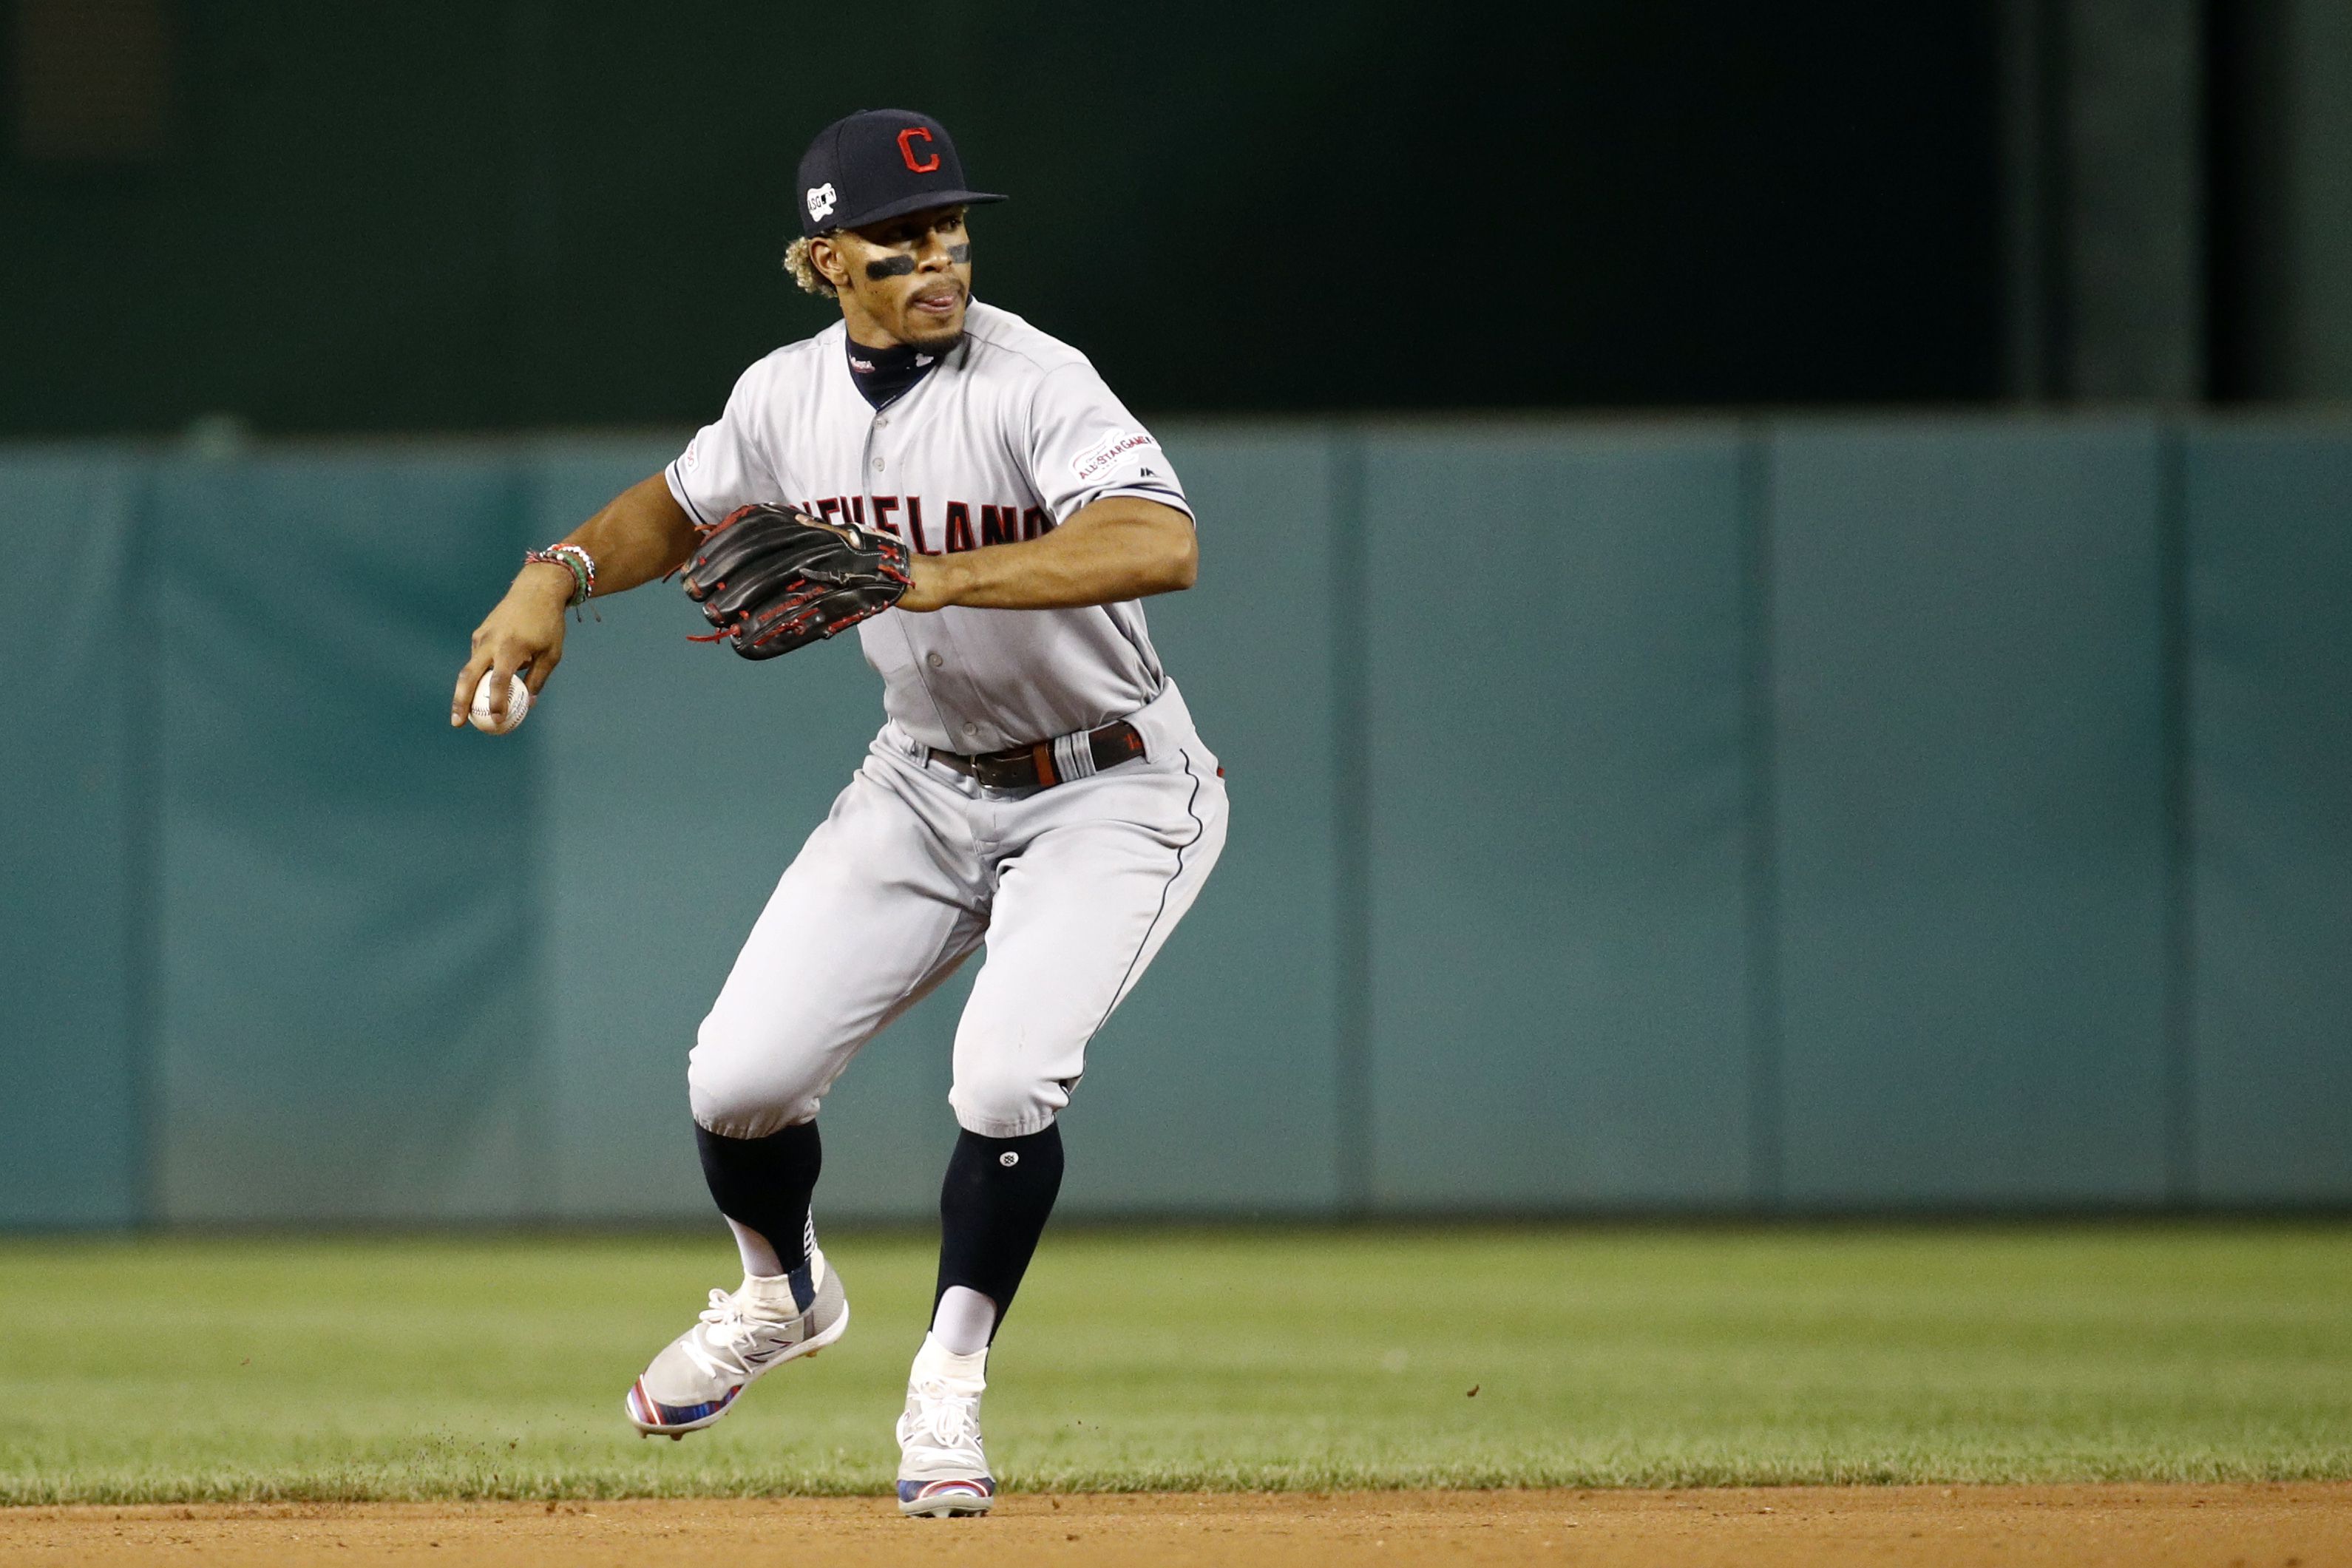 Cleveland intends to trade Francisco Lindor, per report (paging